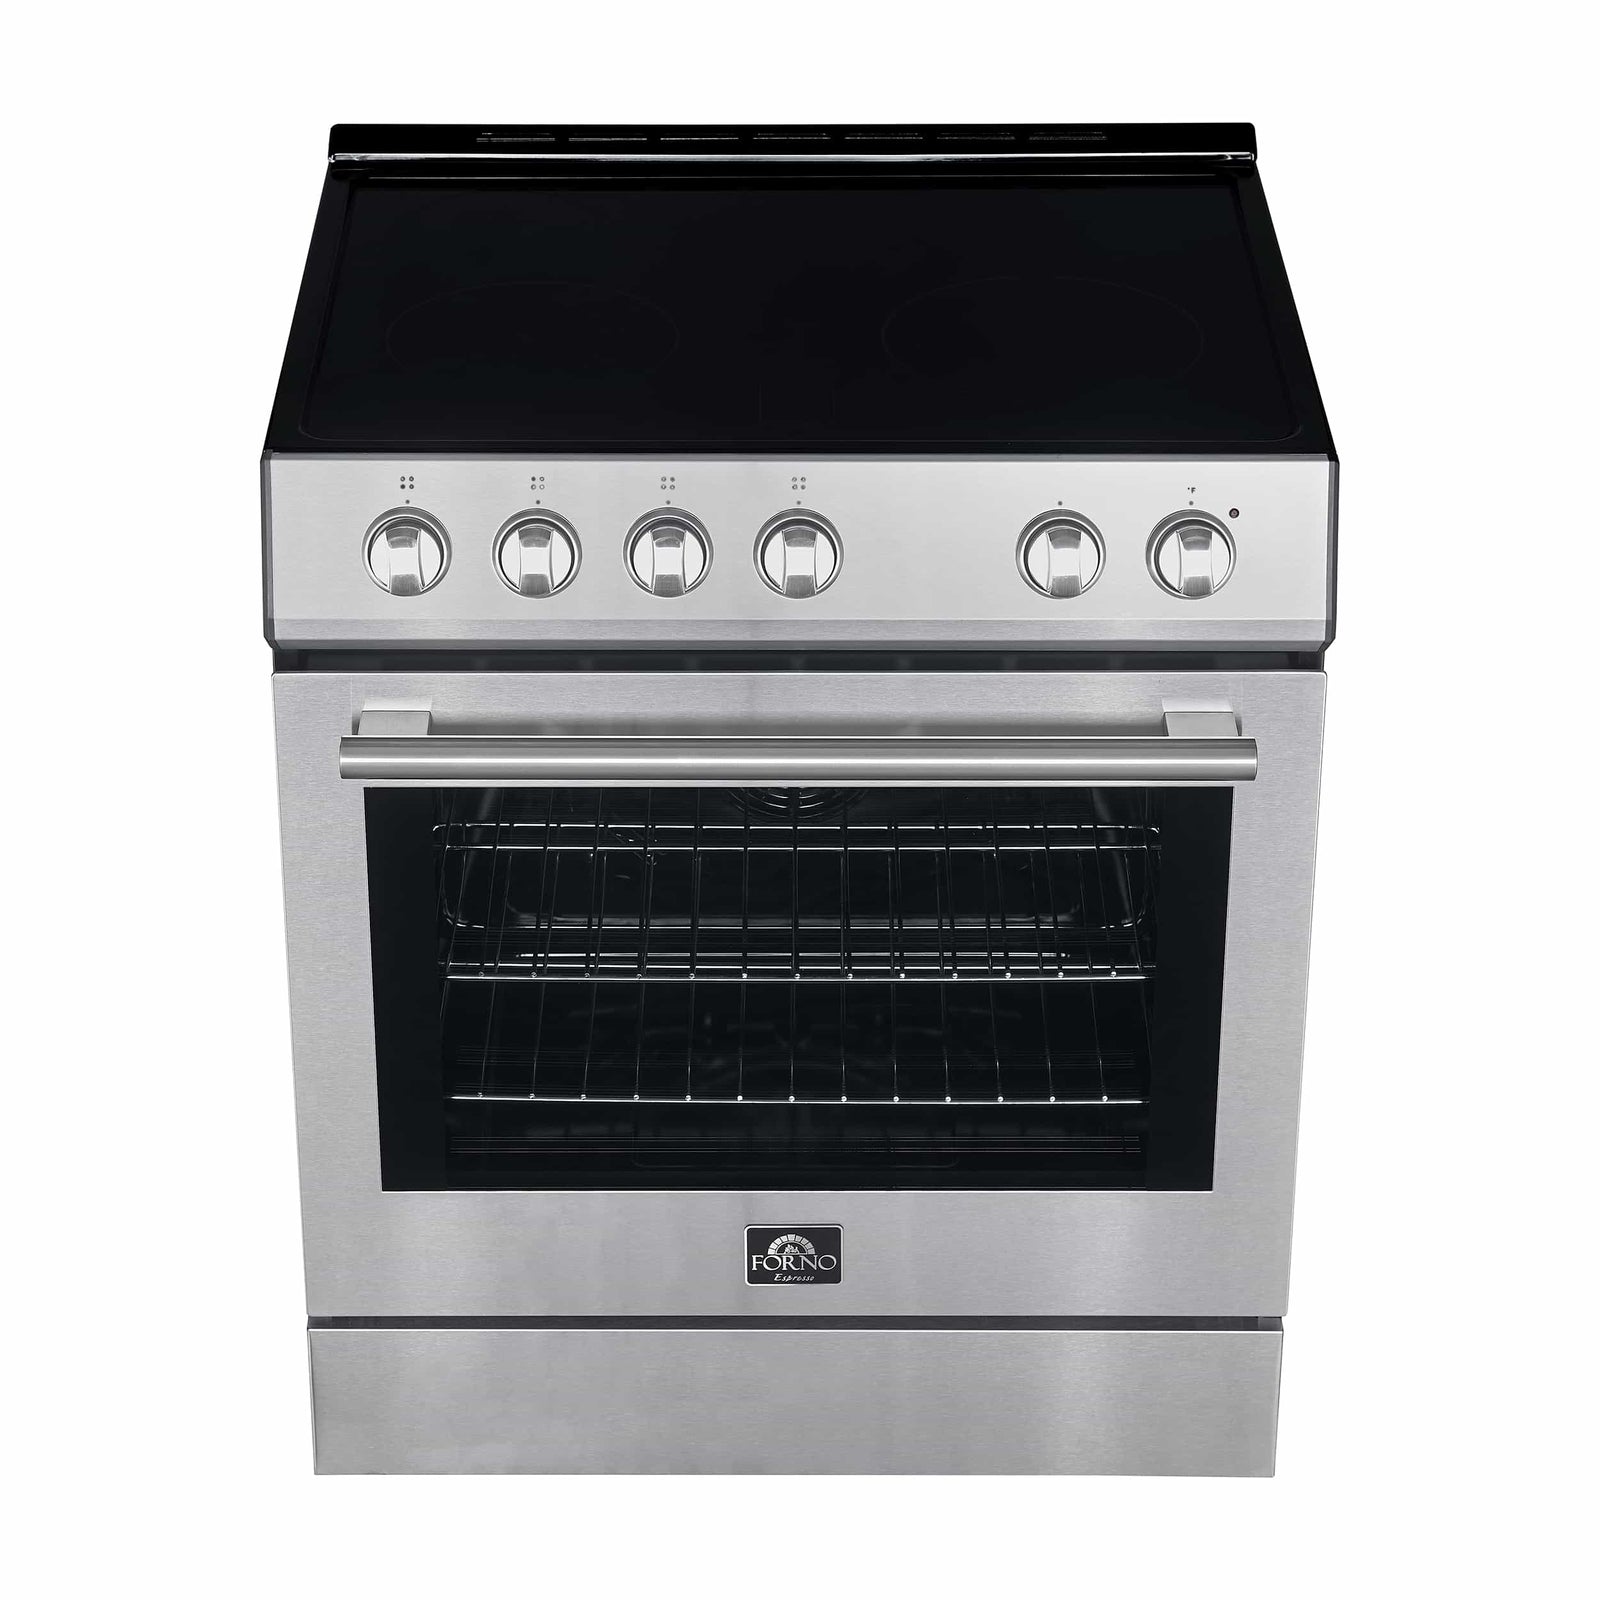 FORNO - Leonardo Espresso 30-Inch Electric Range with 5.0 cu. Ft. Electric Oven - Stainless Steel